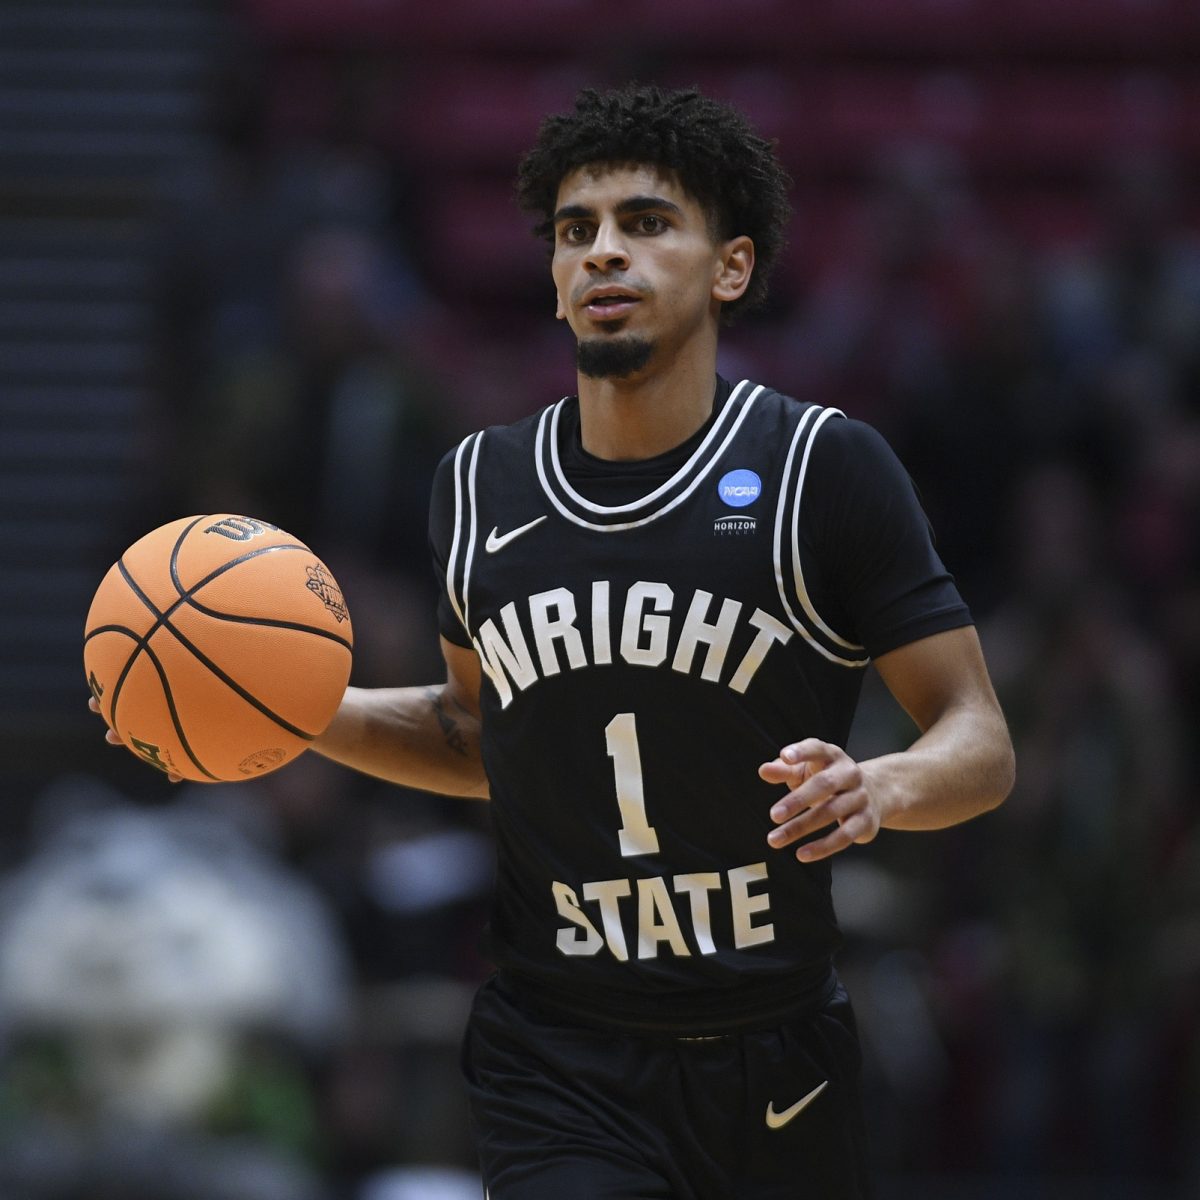 UC Riverside (UCR) vs. Wright State Prediction, Preview, and Odds - 11-22-2022